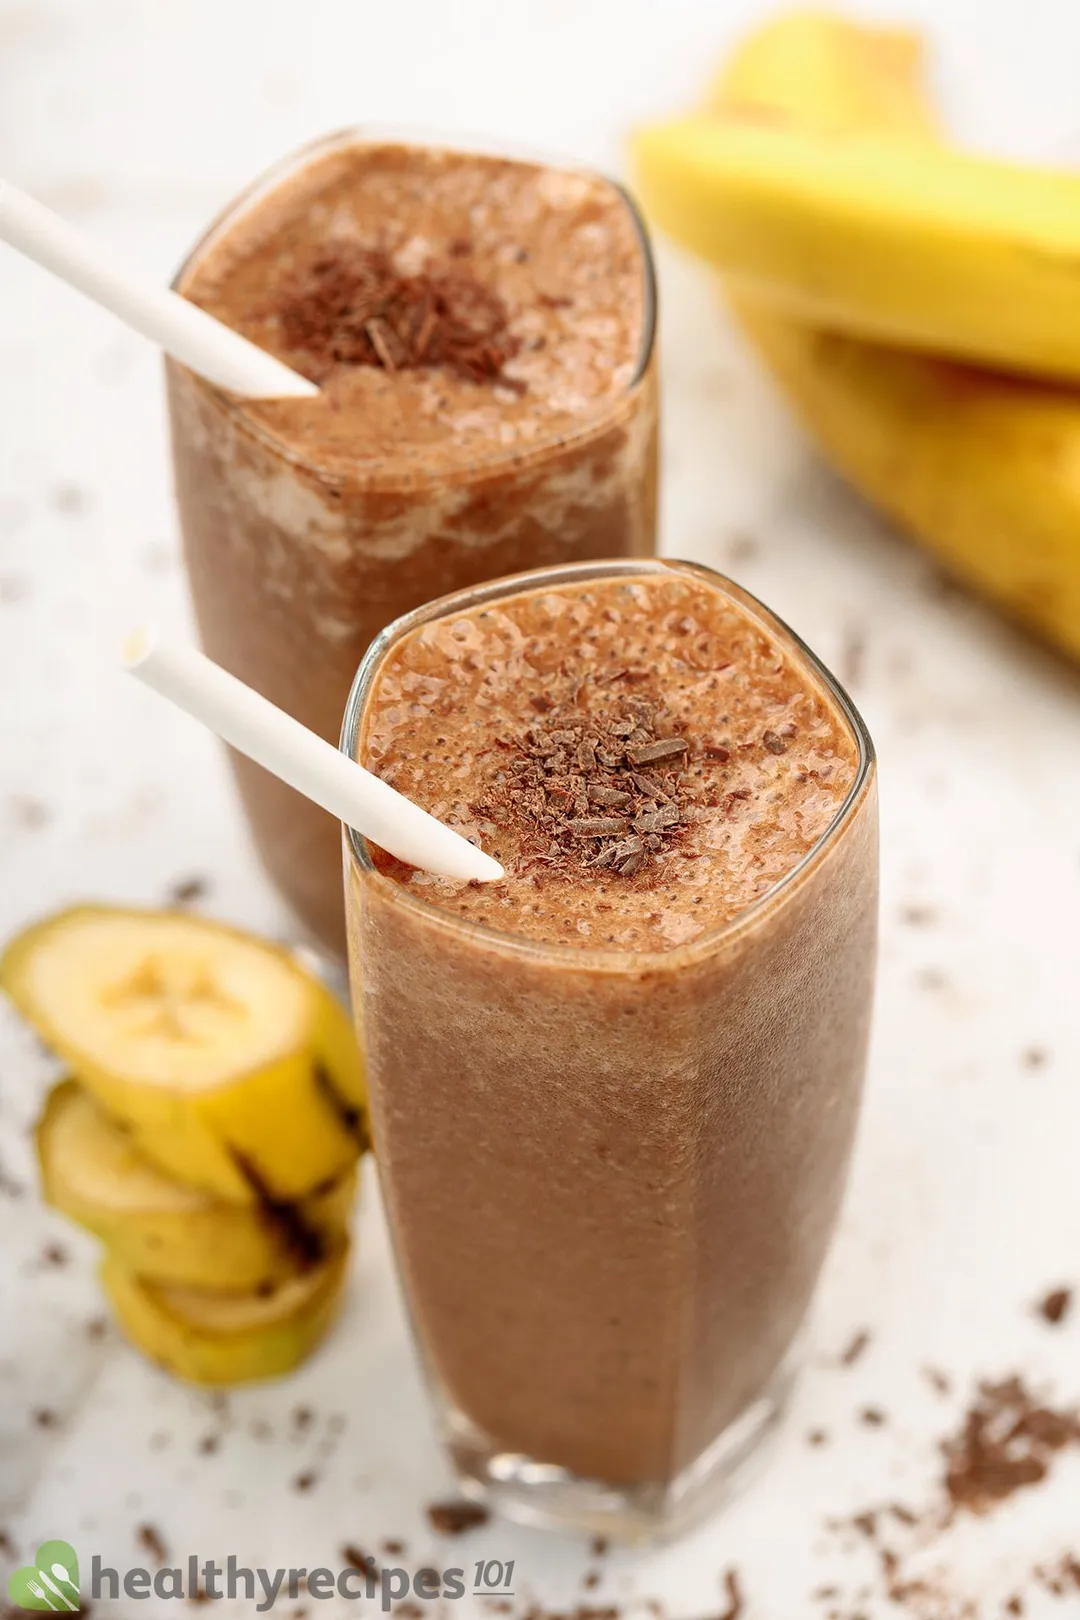 Two glasses of chocolate banana smoothies placed near unpeeled yellow bananas.